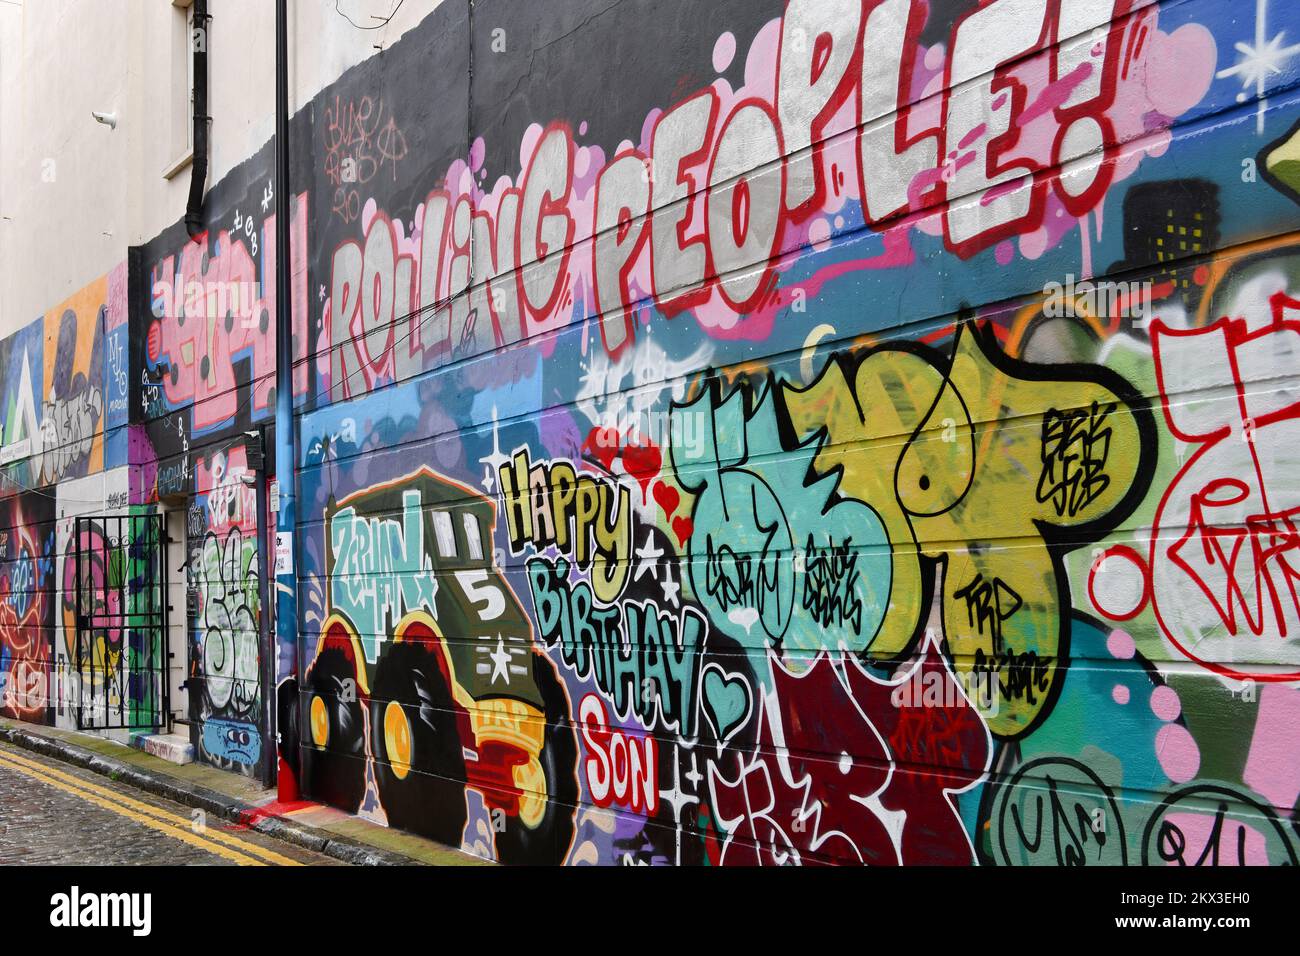 A wall in Grimsby Street, Shoreditch covered in graffiti including a truck and the words rolling people and happy birthay son Stock Photo